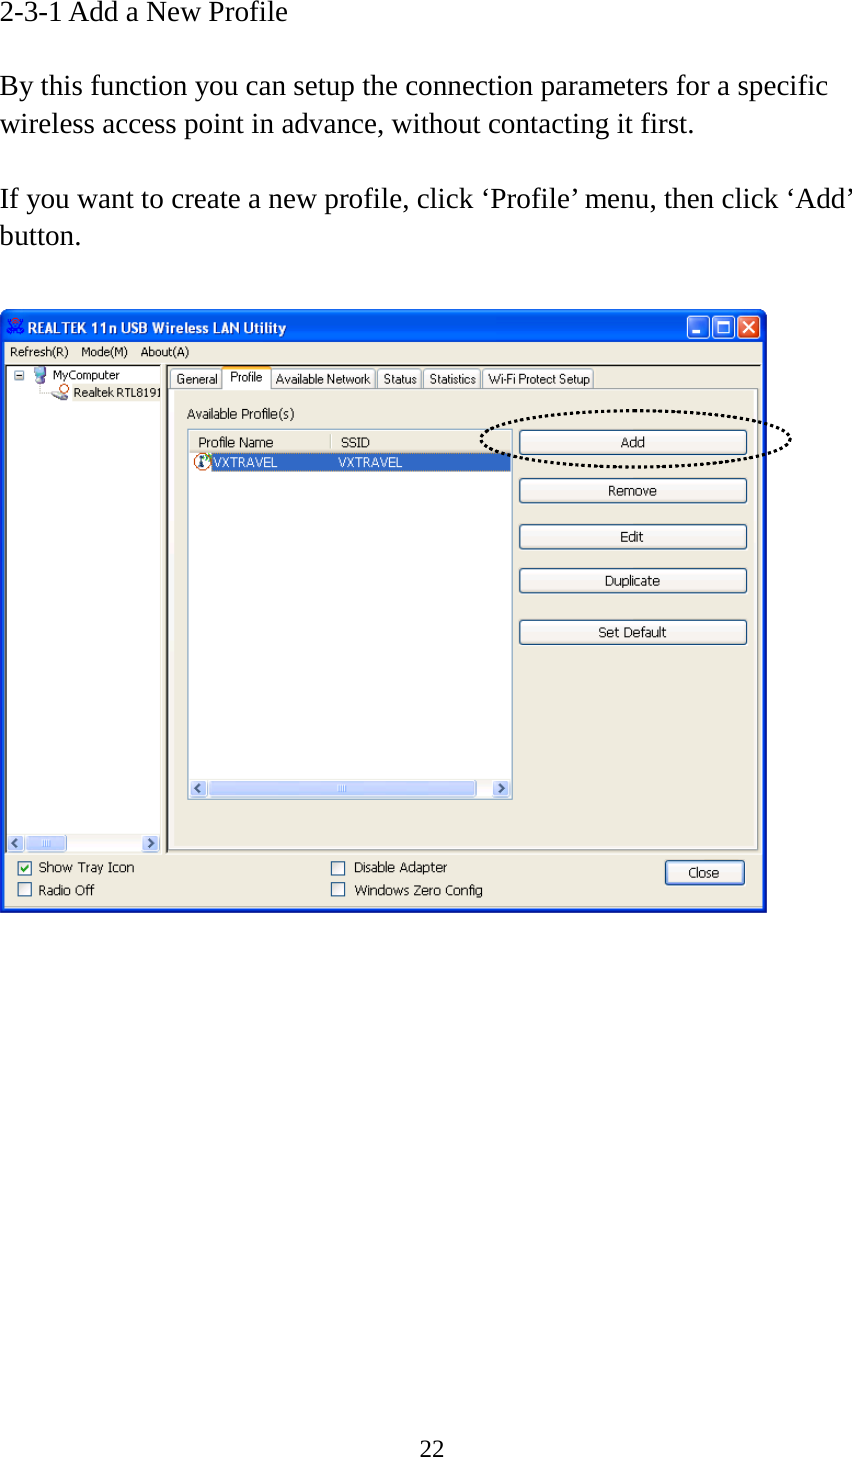 22  2-3-1 Add a New Profile  By this function you can setup the connection parameters for a specific wireless access point in advance, without contacting it first.  If you want to create a new profile, click ‘Profile’ menu, then click ‘Add’ button.    